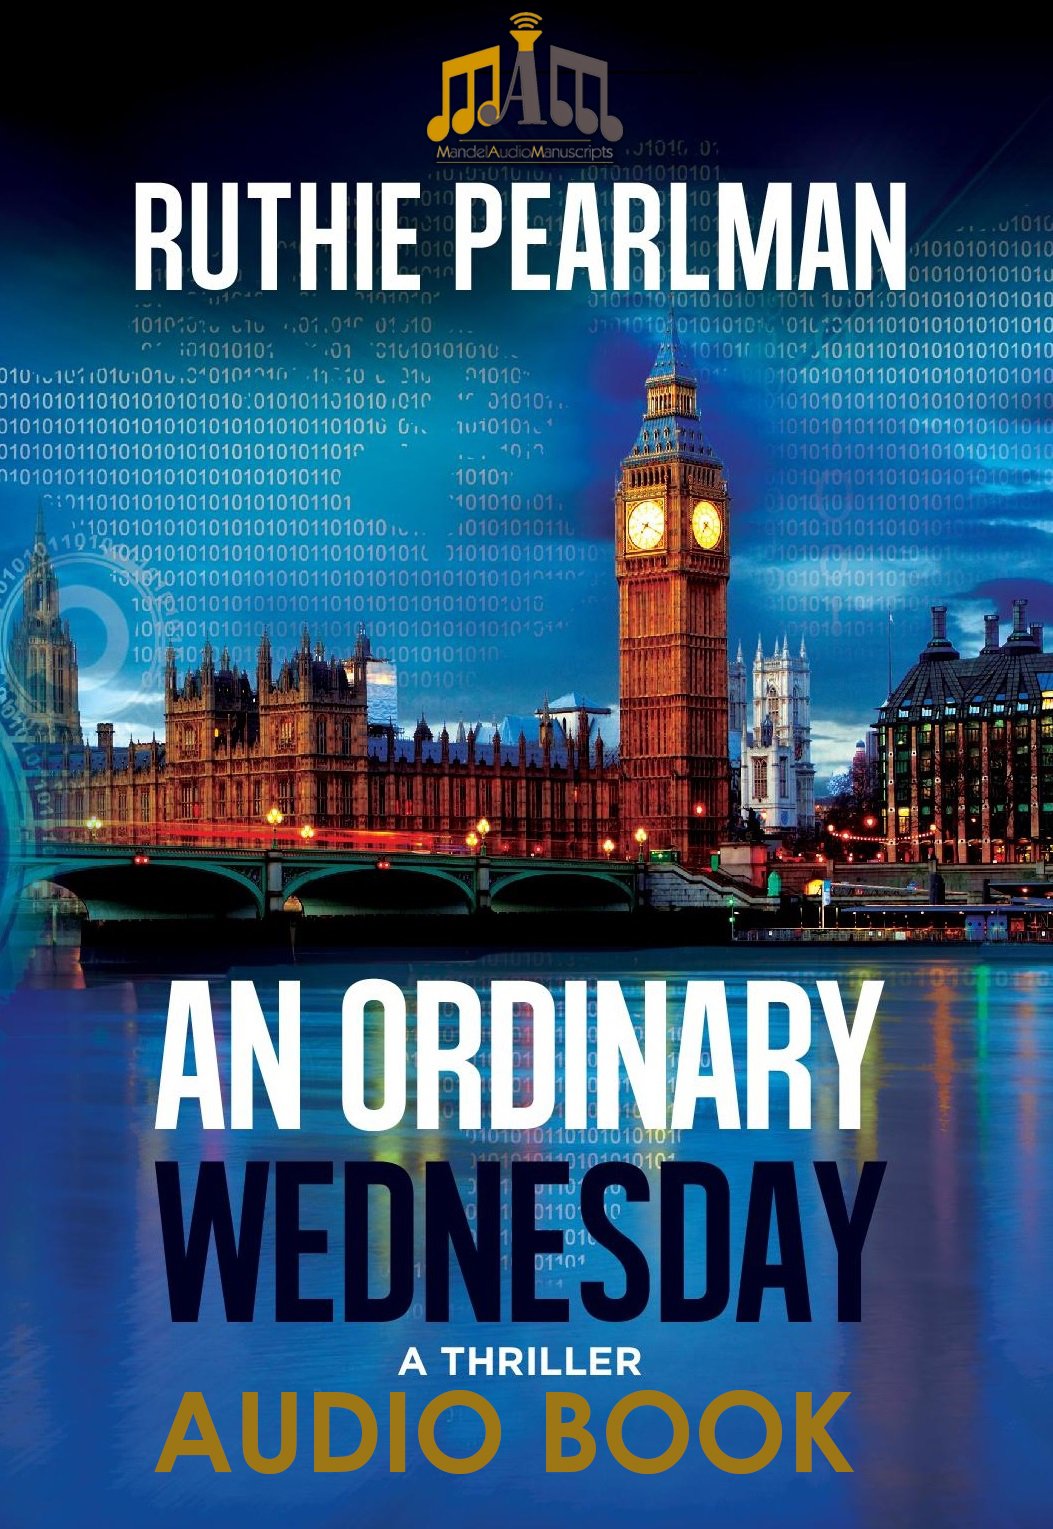 Ruthie Pearlman - An Ordinary Wednesday  (Audio book)